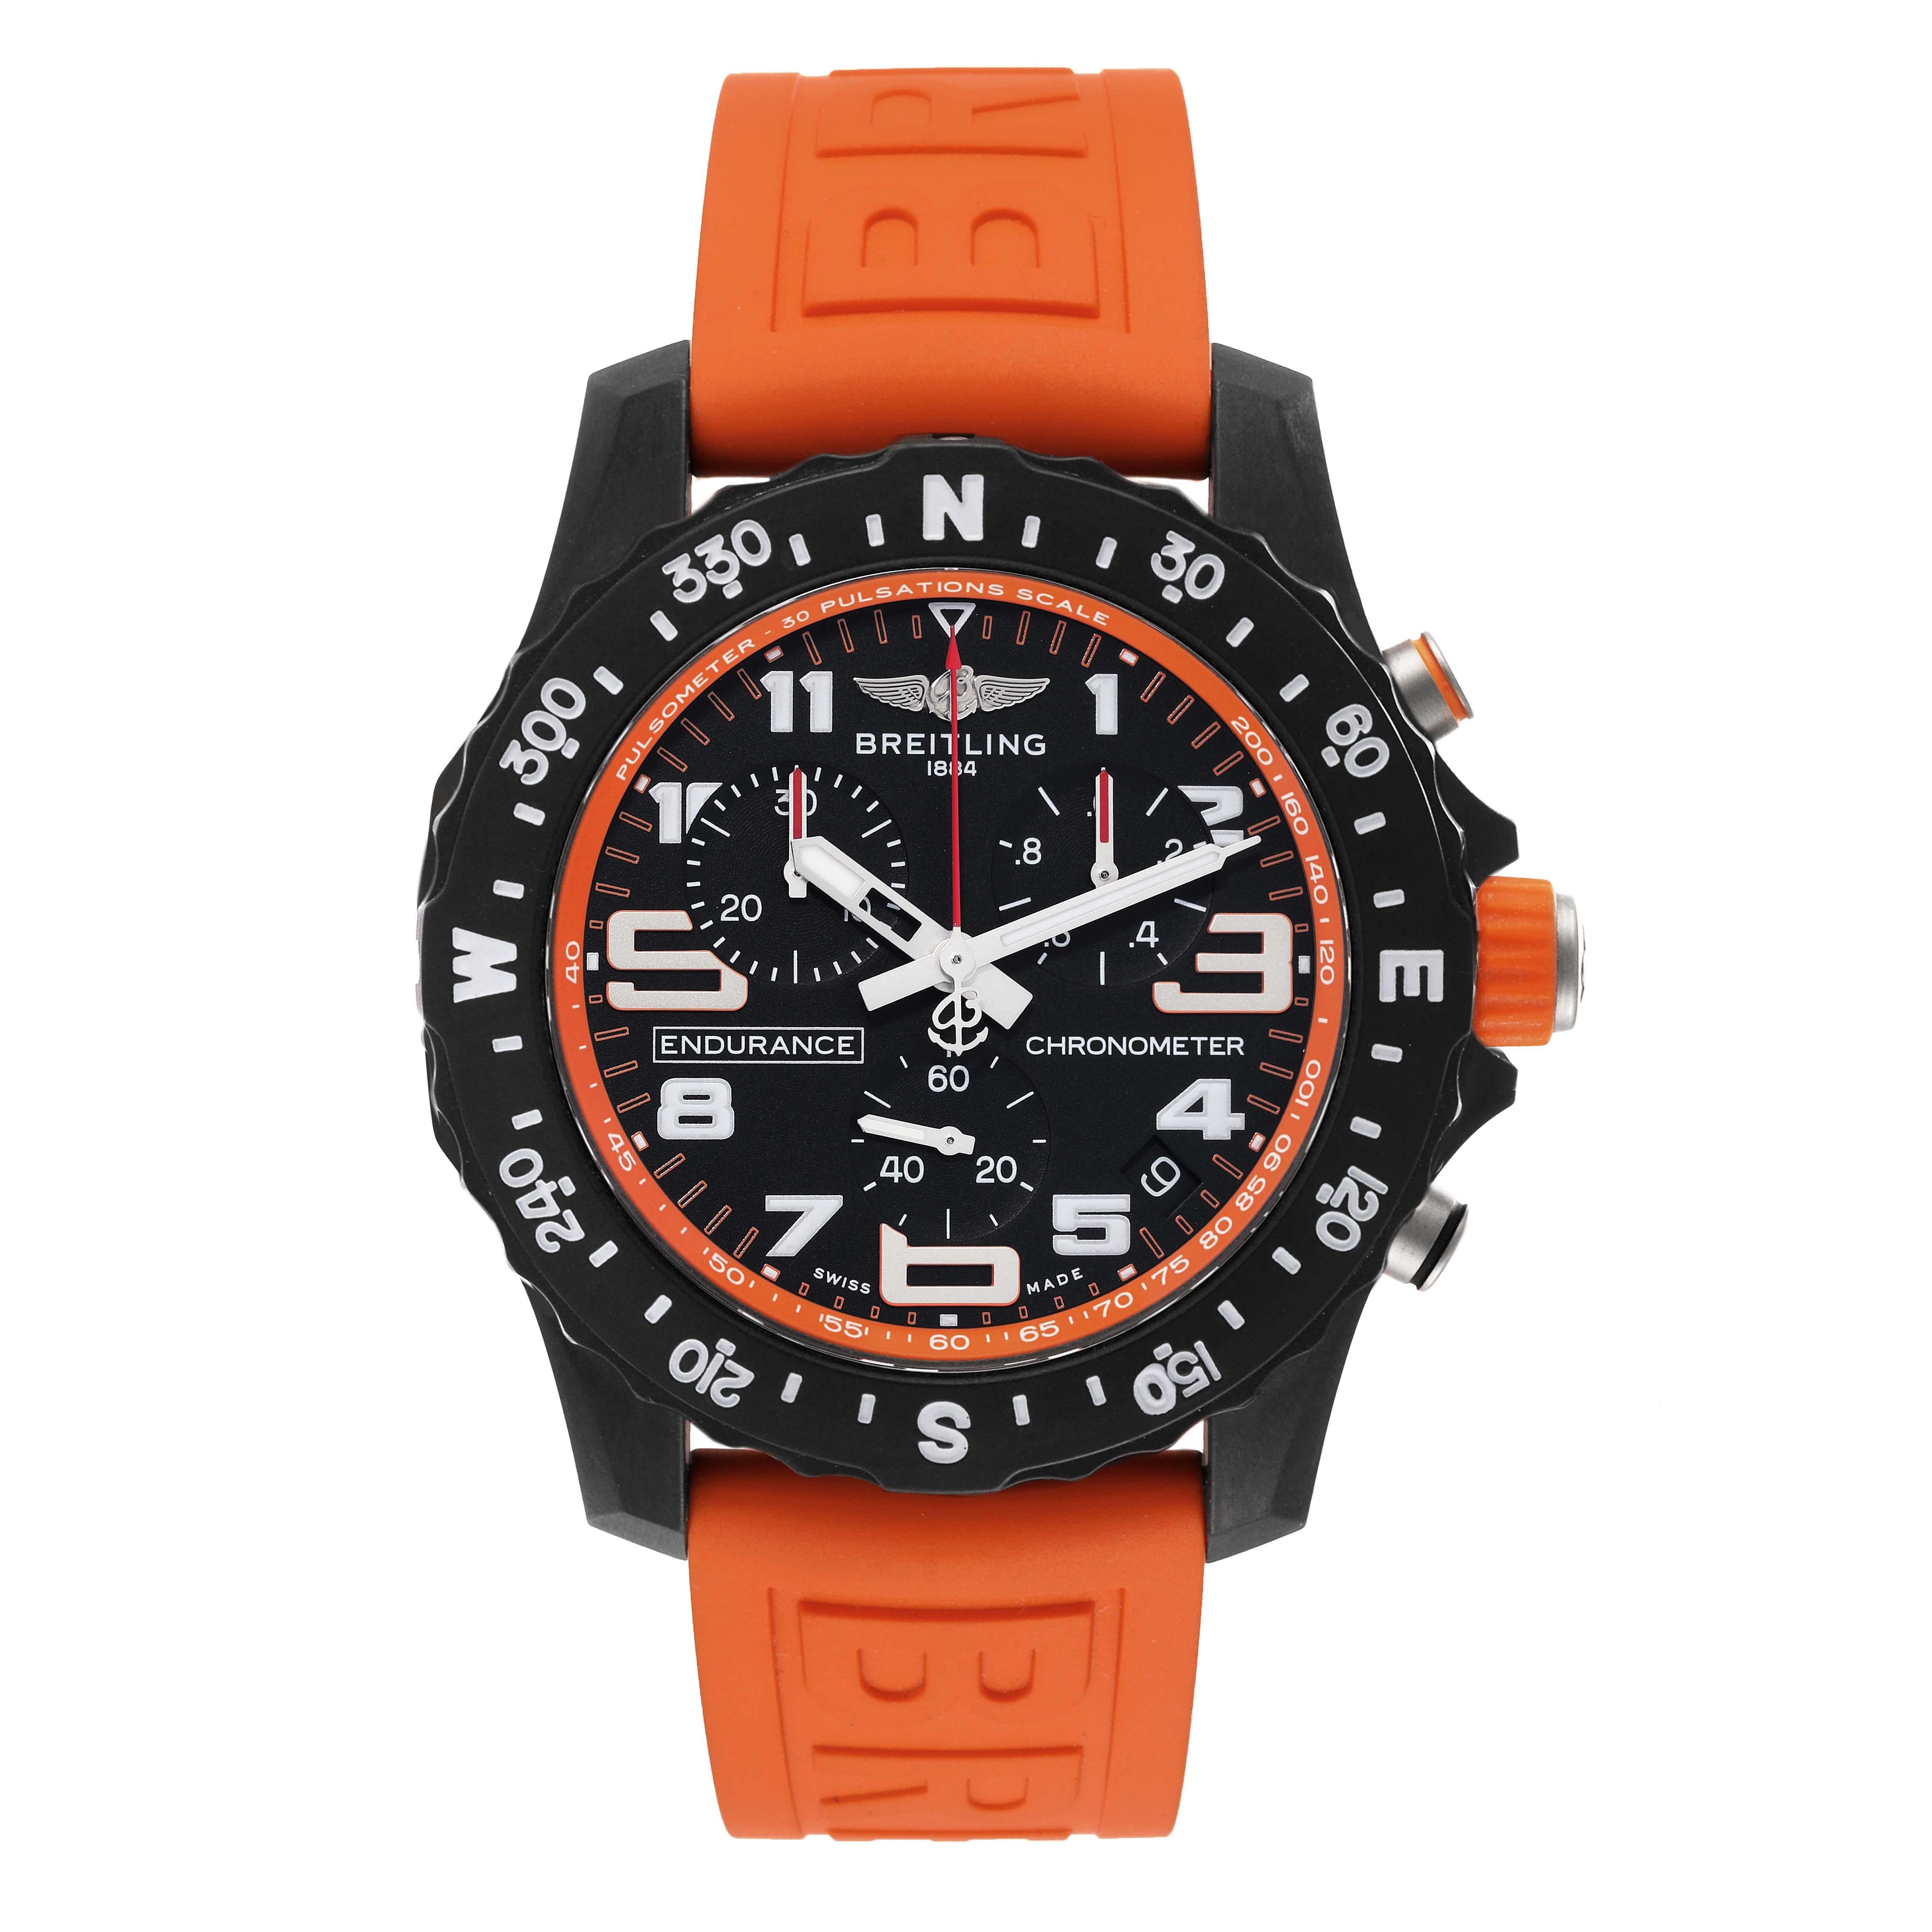 Breitling Endurance Pro Orange Breitlight Mens Watch X82310 Card. COSC-certified quartz chronograph movement. Breitlight polymer case 44 mm in diameter. Case thickness 12.5 mm. Orange rubberized crown signed with the Breitling logo. Breitlight